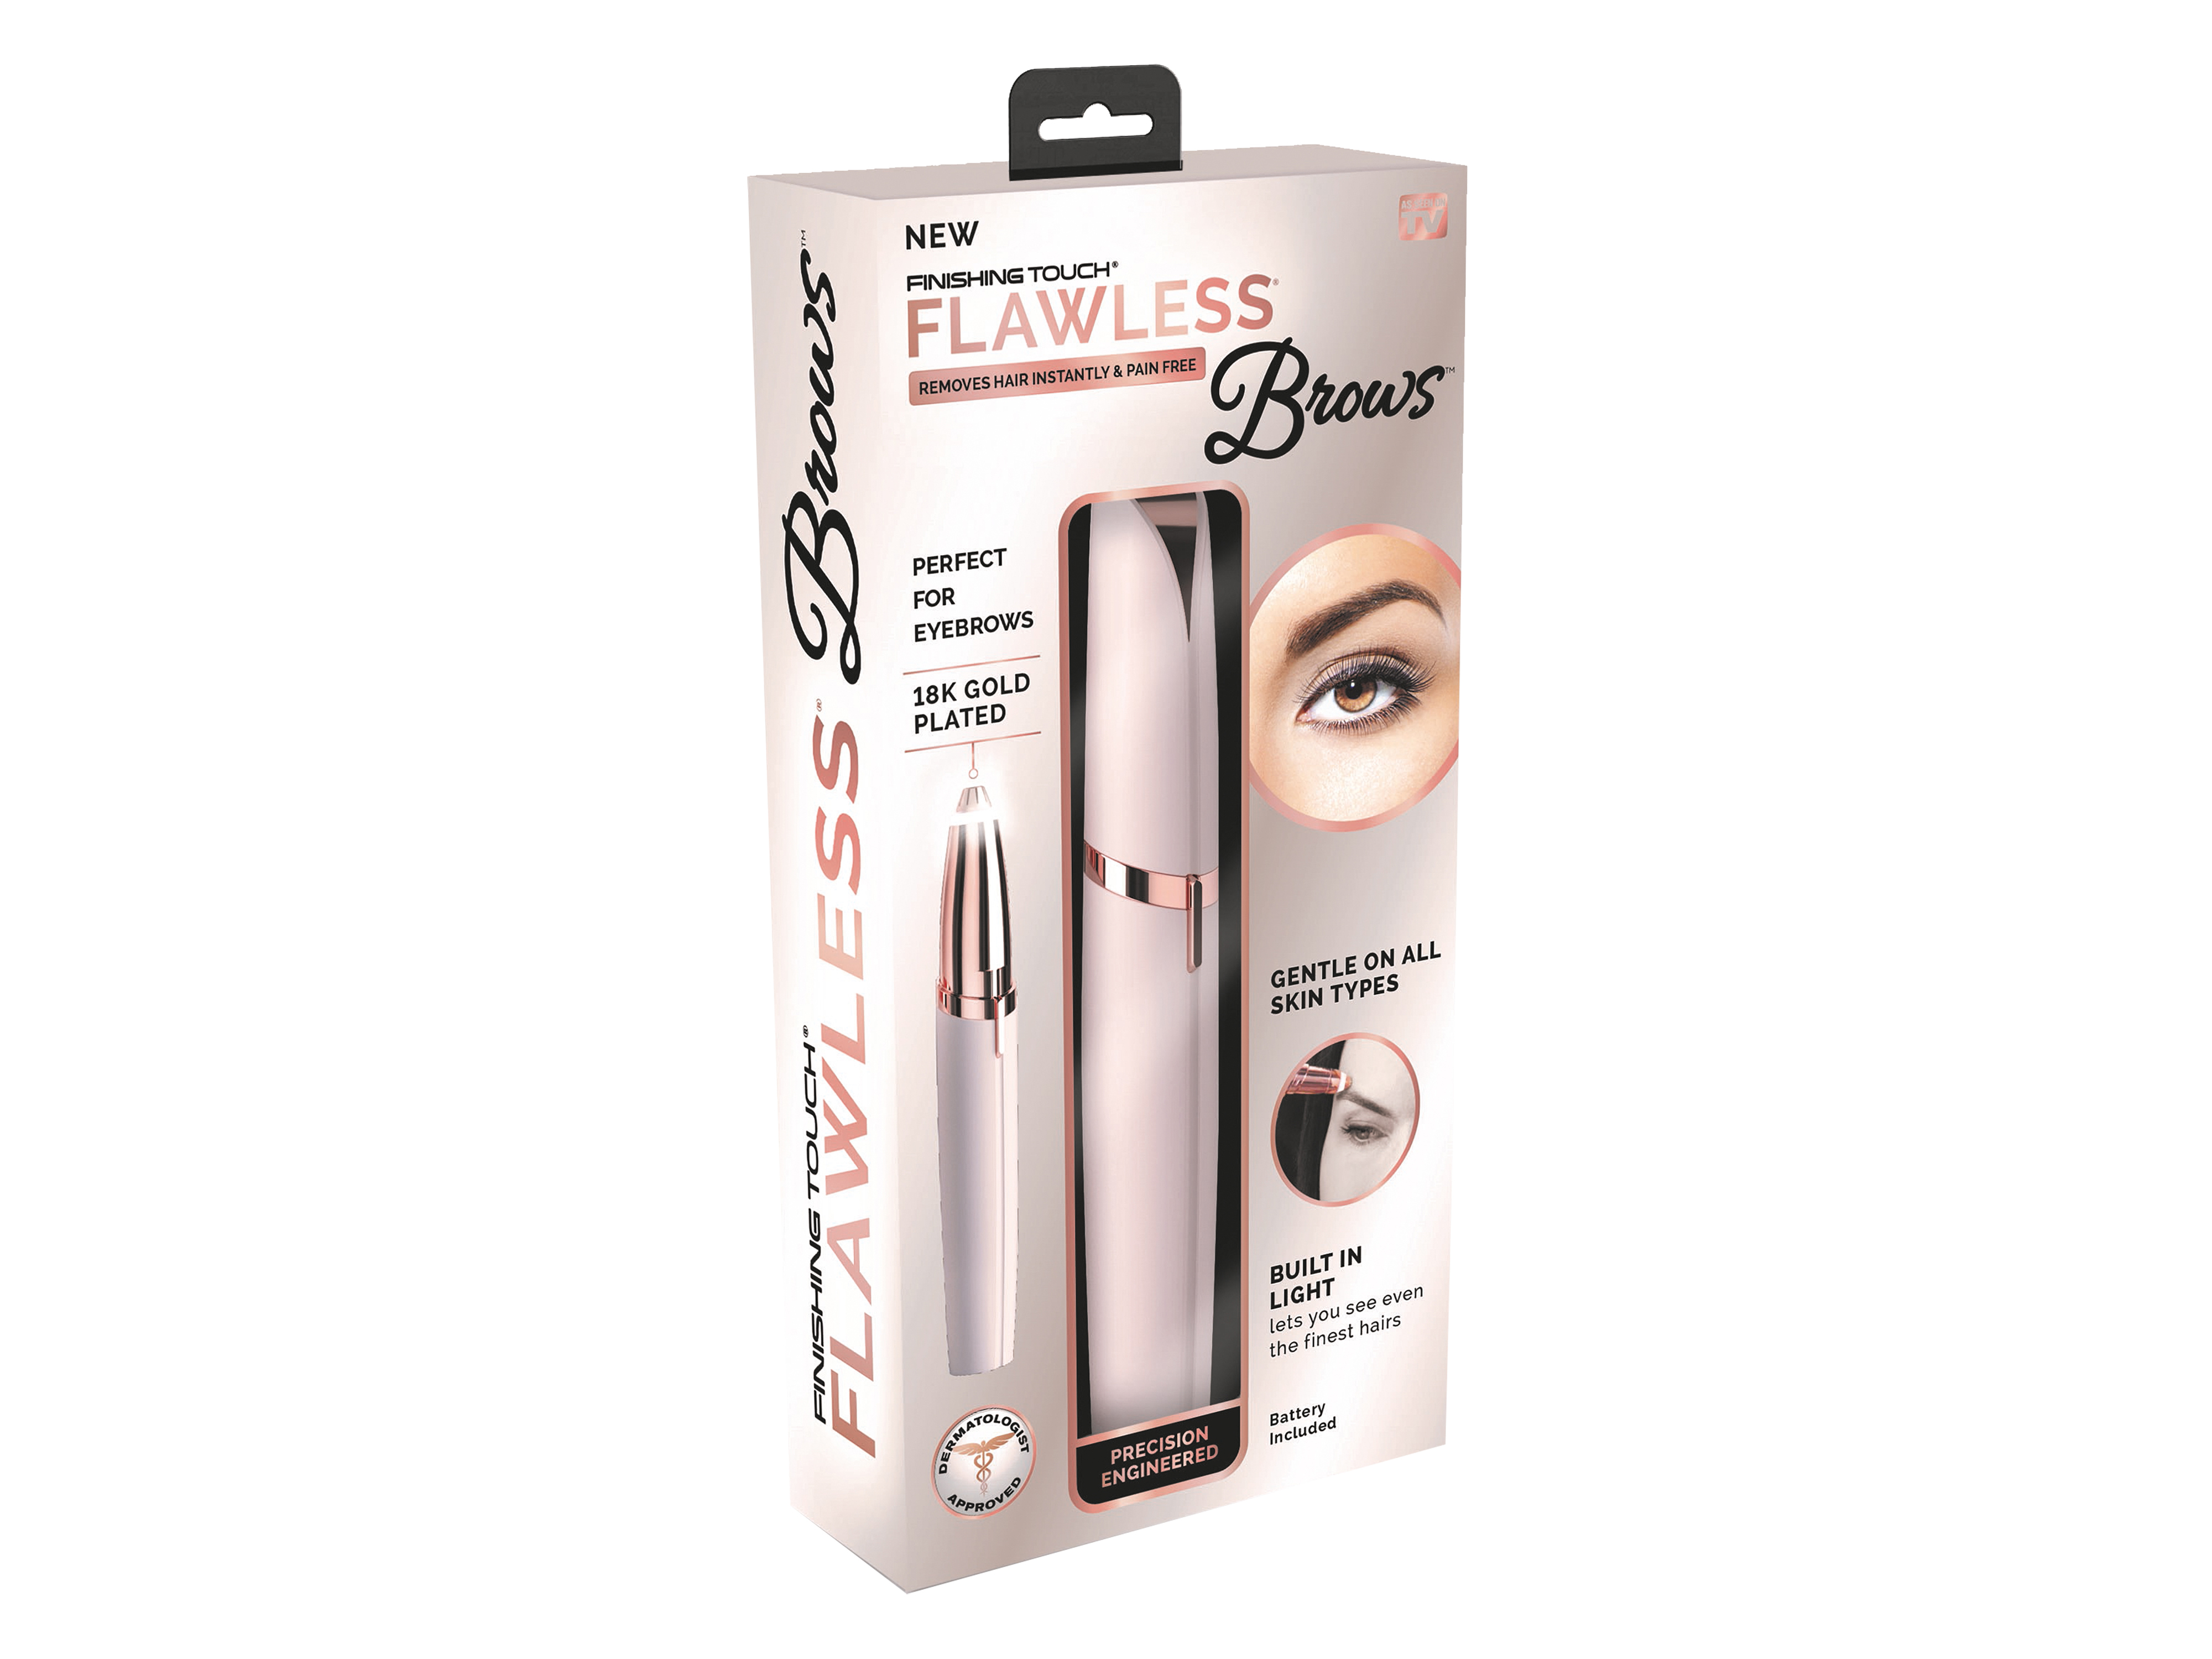 Flawless Finishing Touch Finishing Touch Brows, 1 stk.